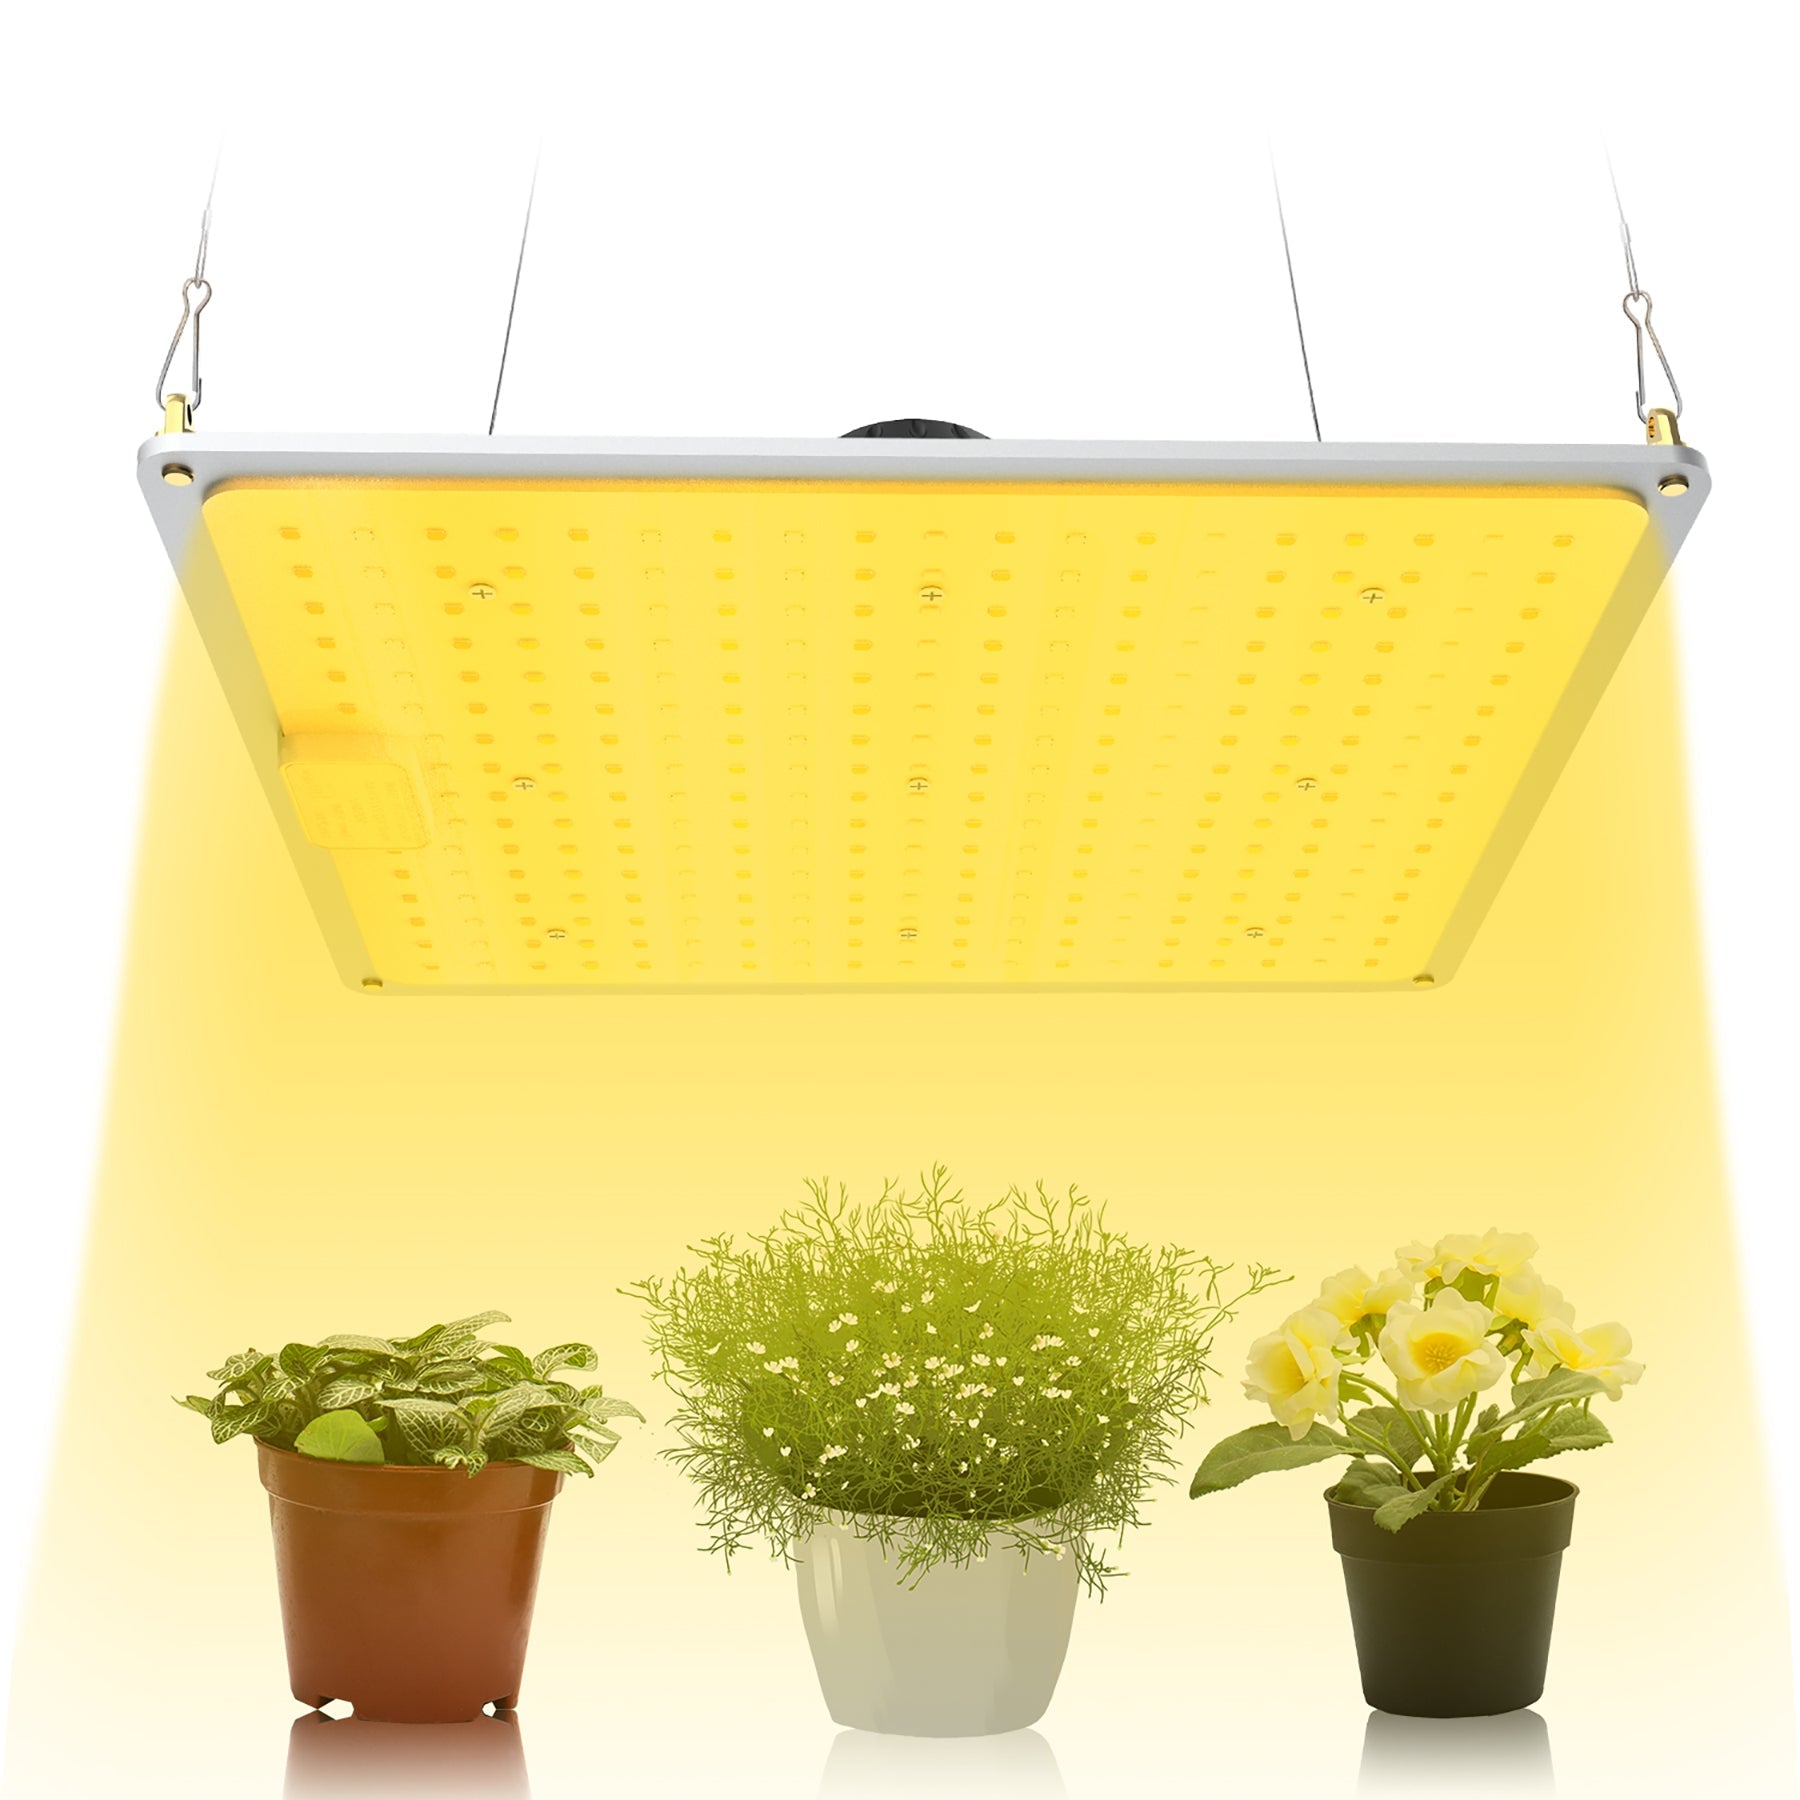 1000W LED Grow Light Full Spectrum For Hydroponic Plant Greenhouse